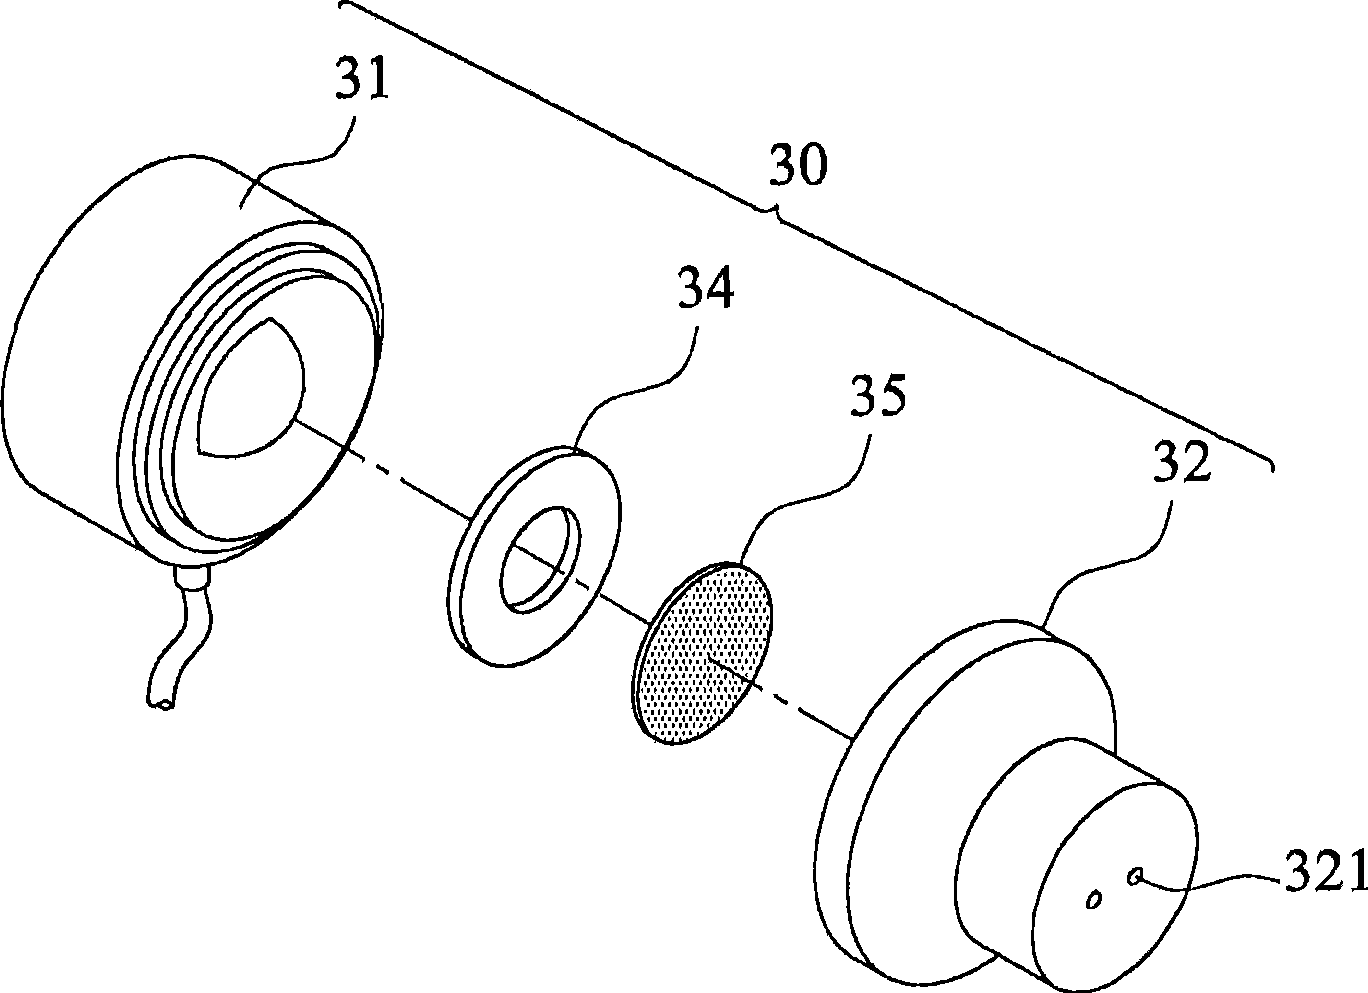 Artificial mouth with acoustic tube outputting plane waves